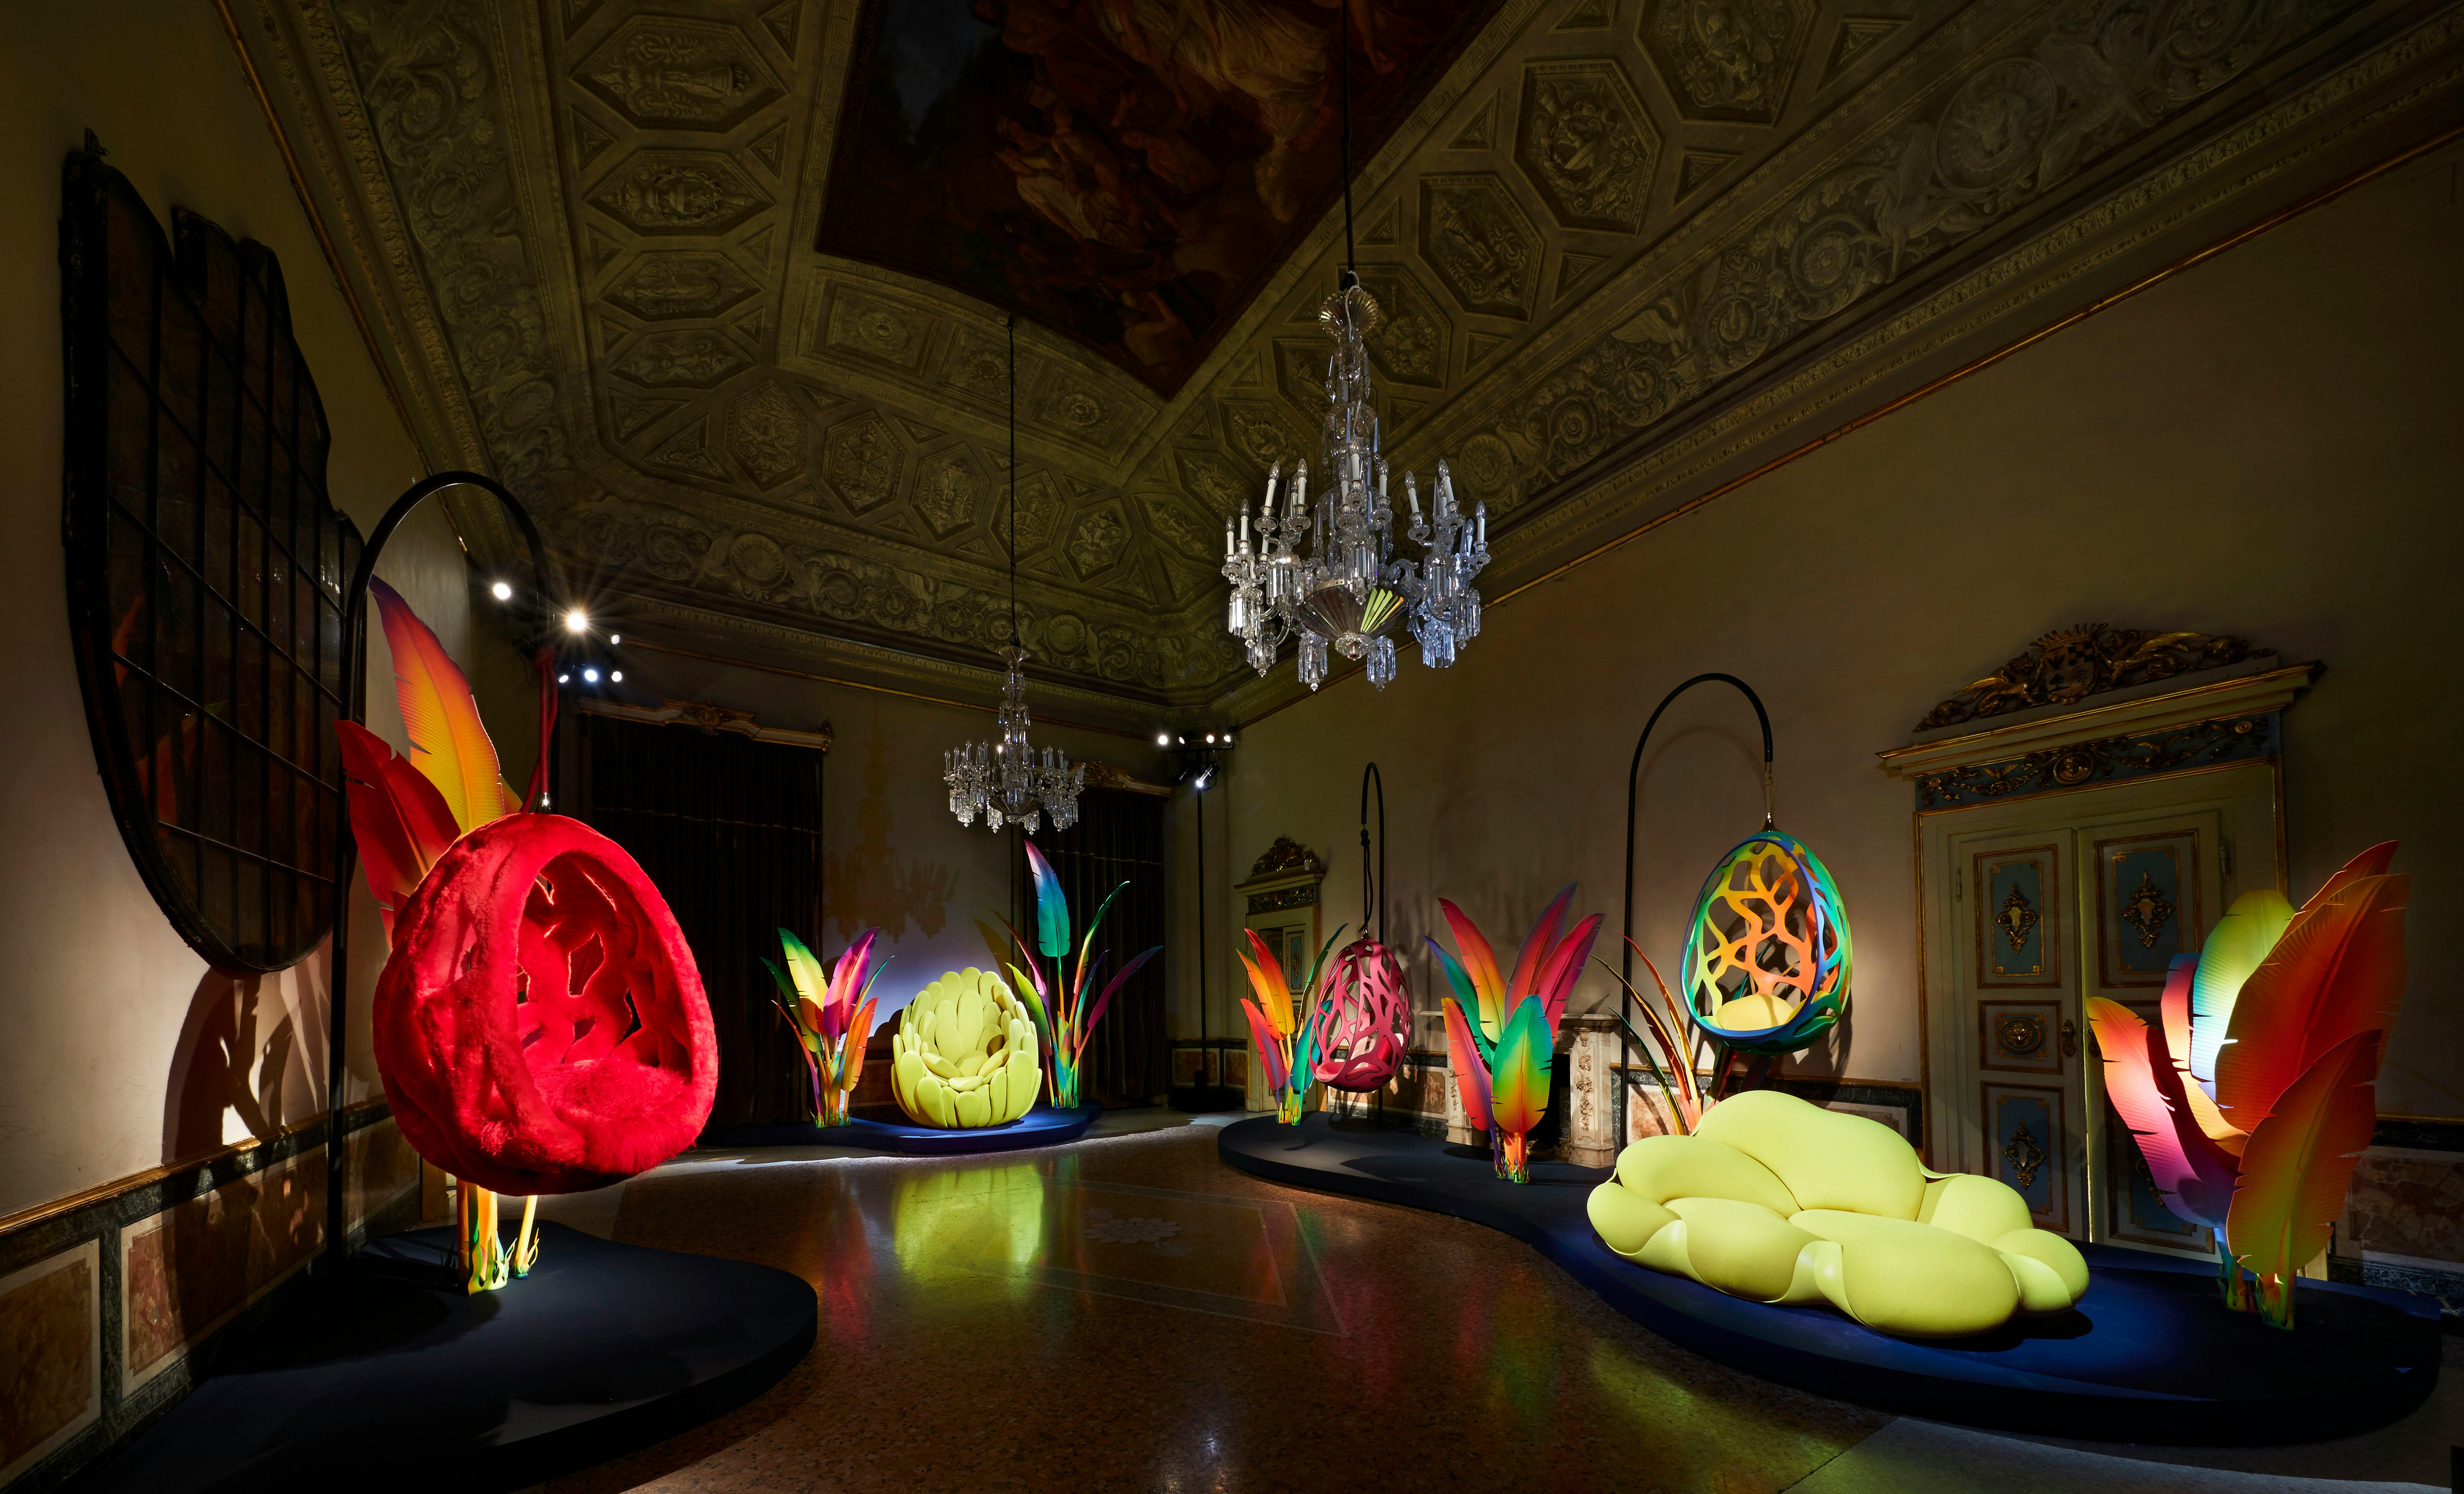 Event: Louis Vuitton's Objets Nomades Exhibit Was a Holiday on Home Turf